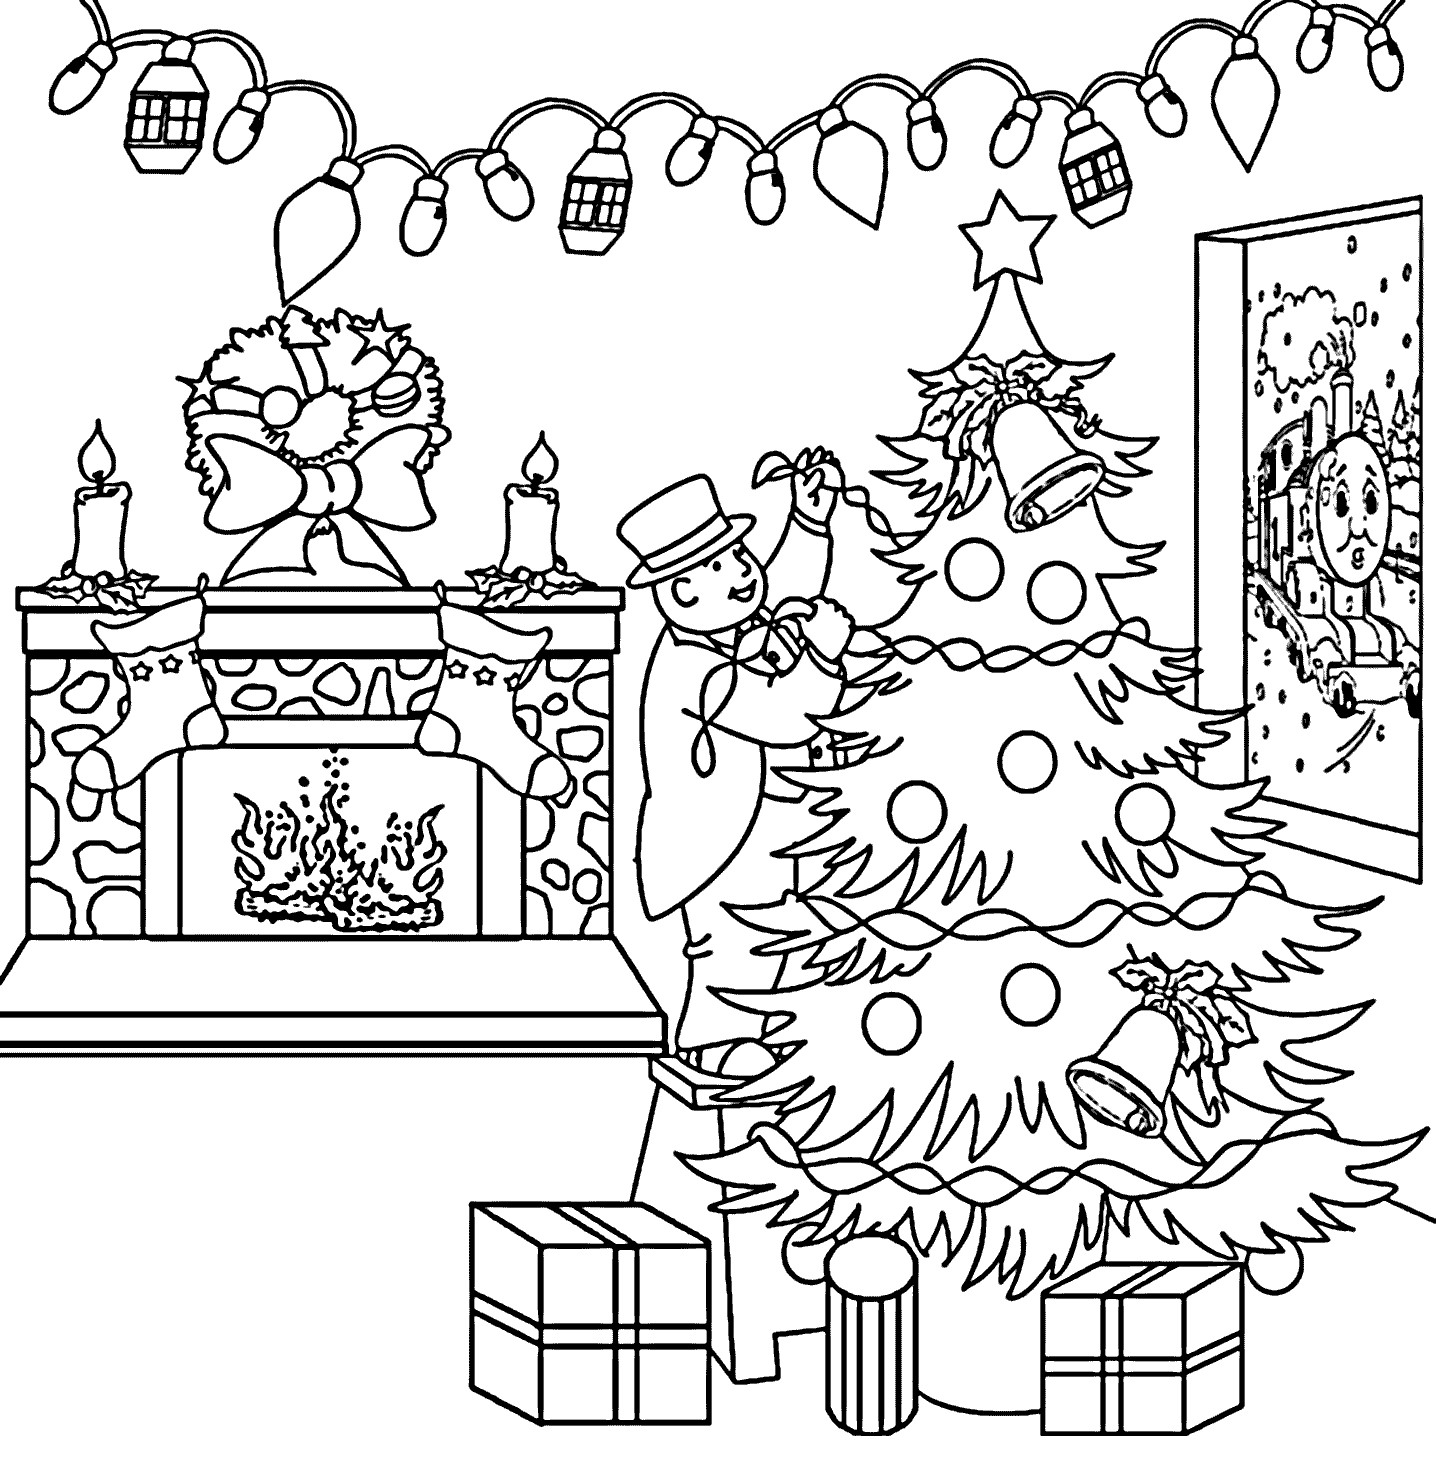 Printable Holiday Coloring Pages
 Christmas Coloring Pages For Adults To Print Free